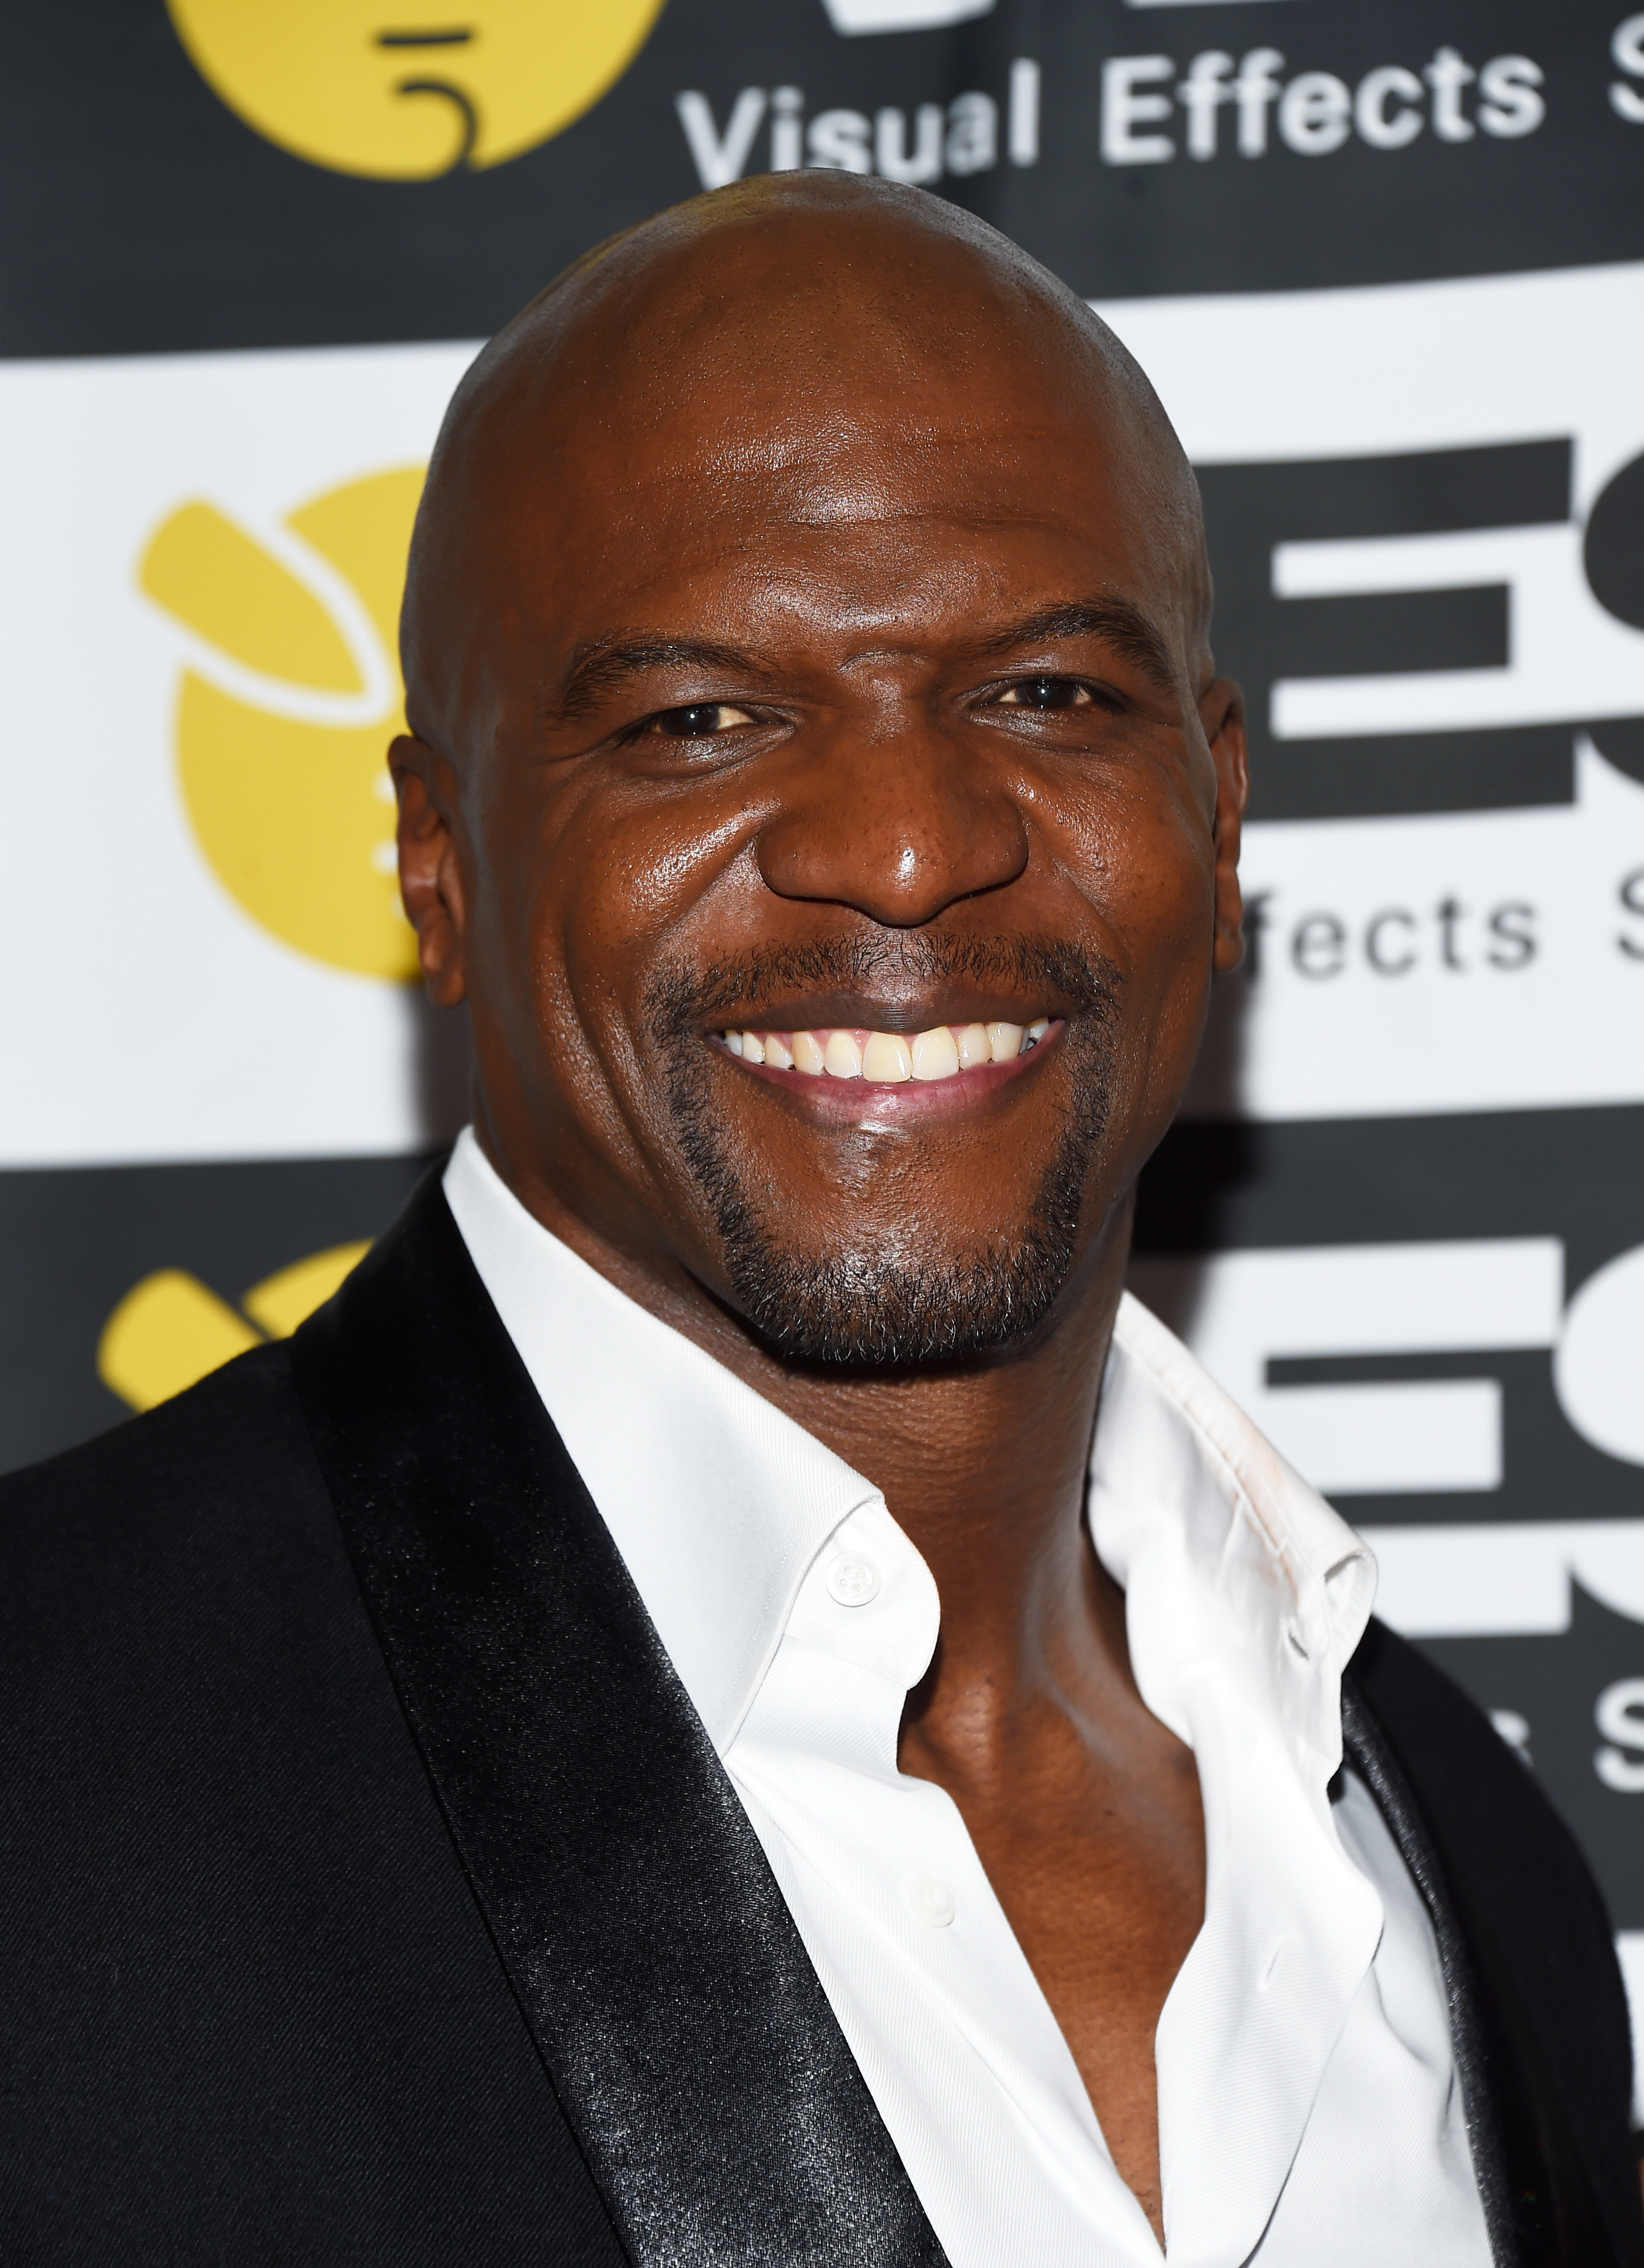 Terry Crews Opens Up About Pornography Addiction That Threatened His ...